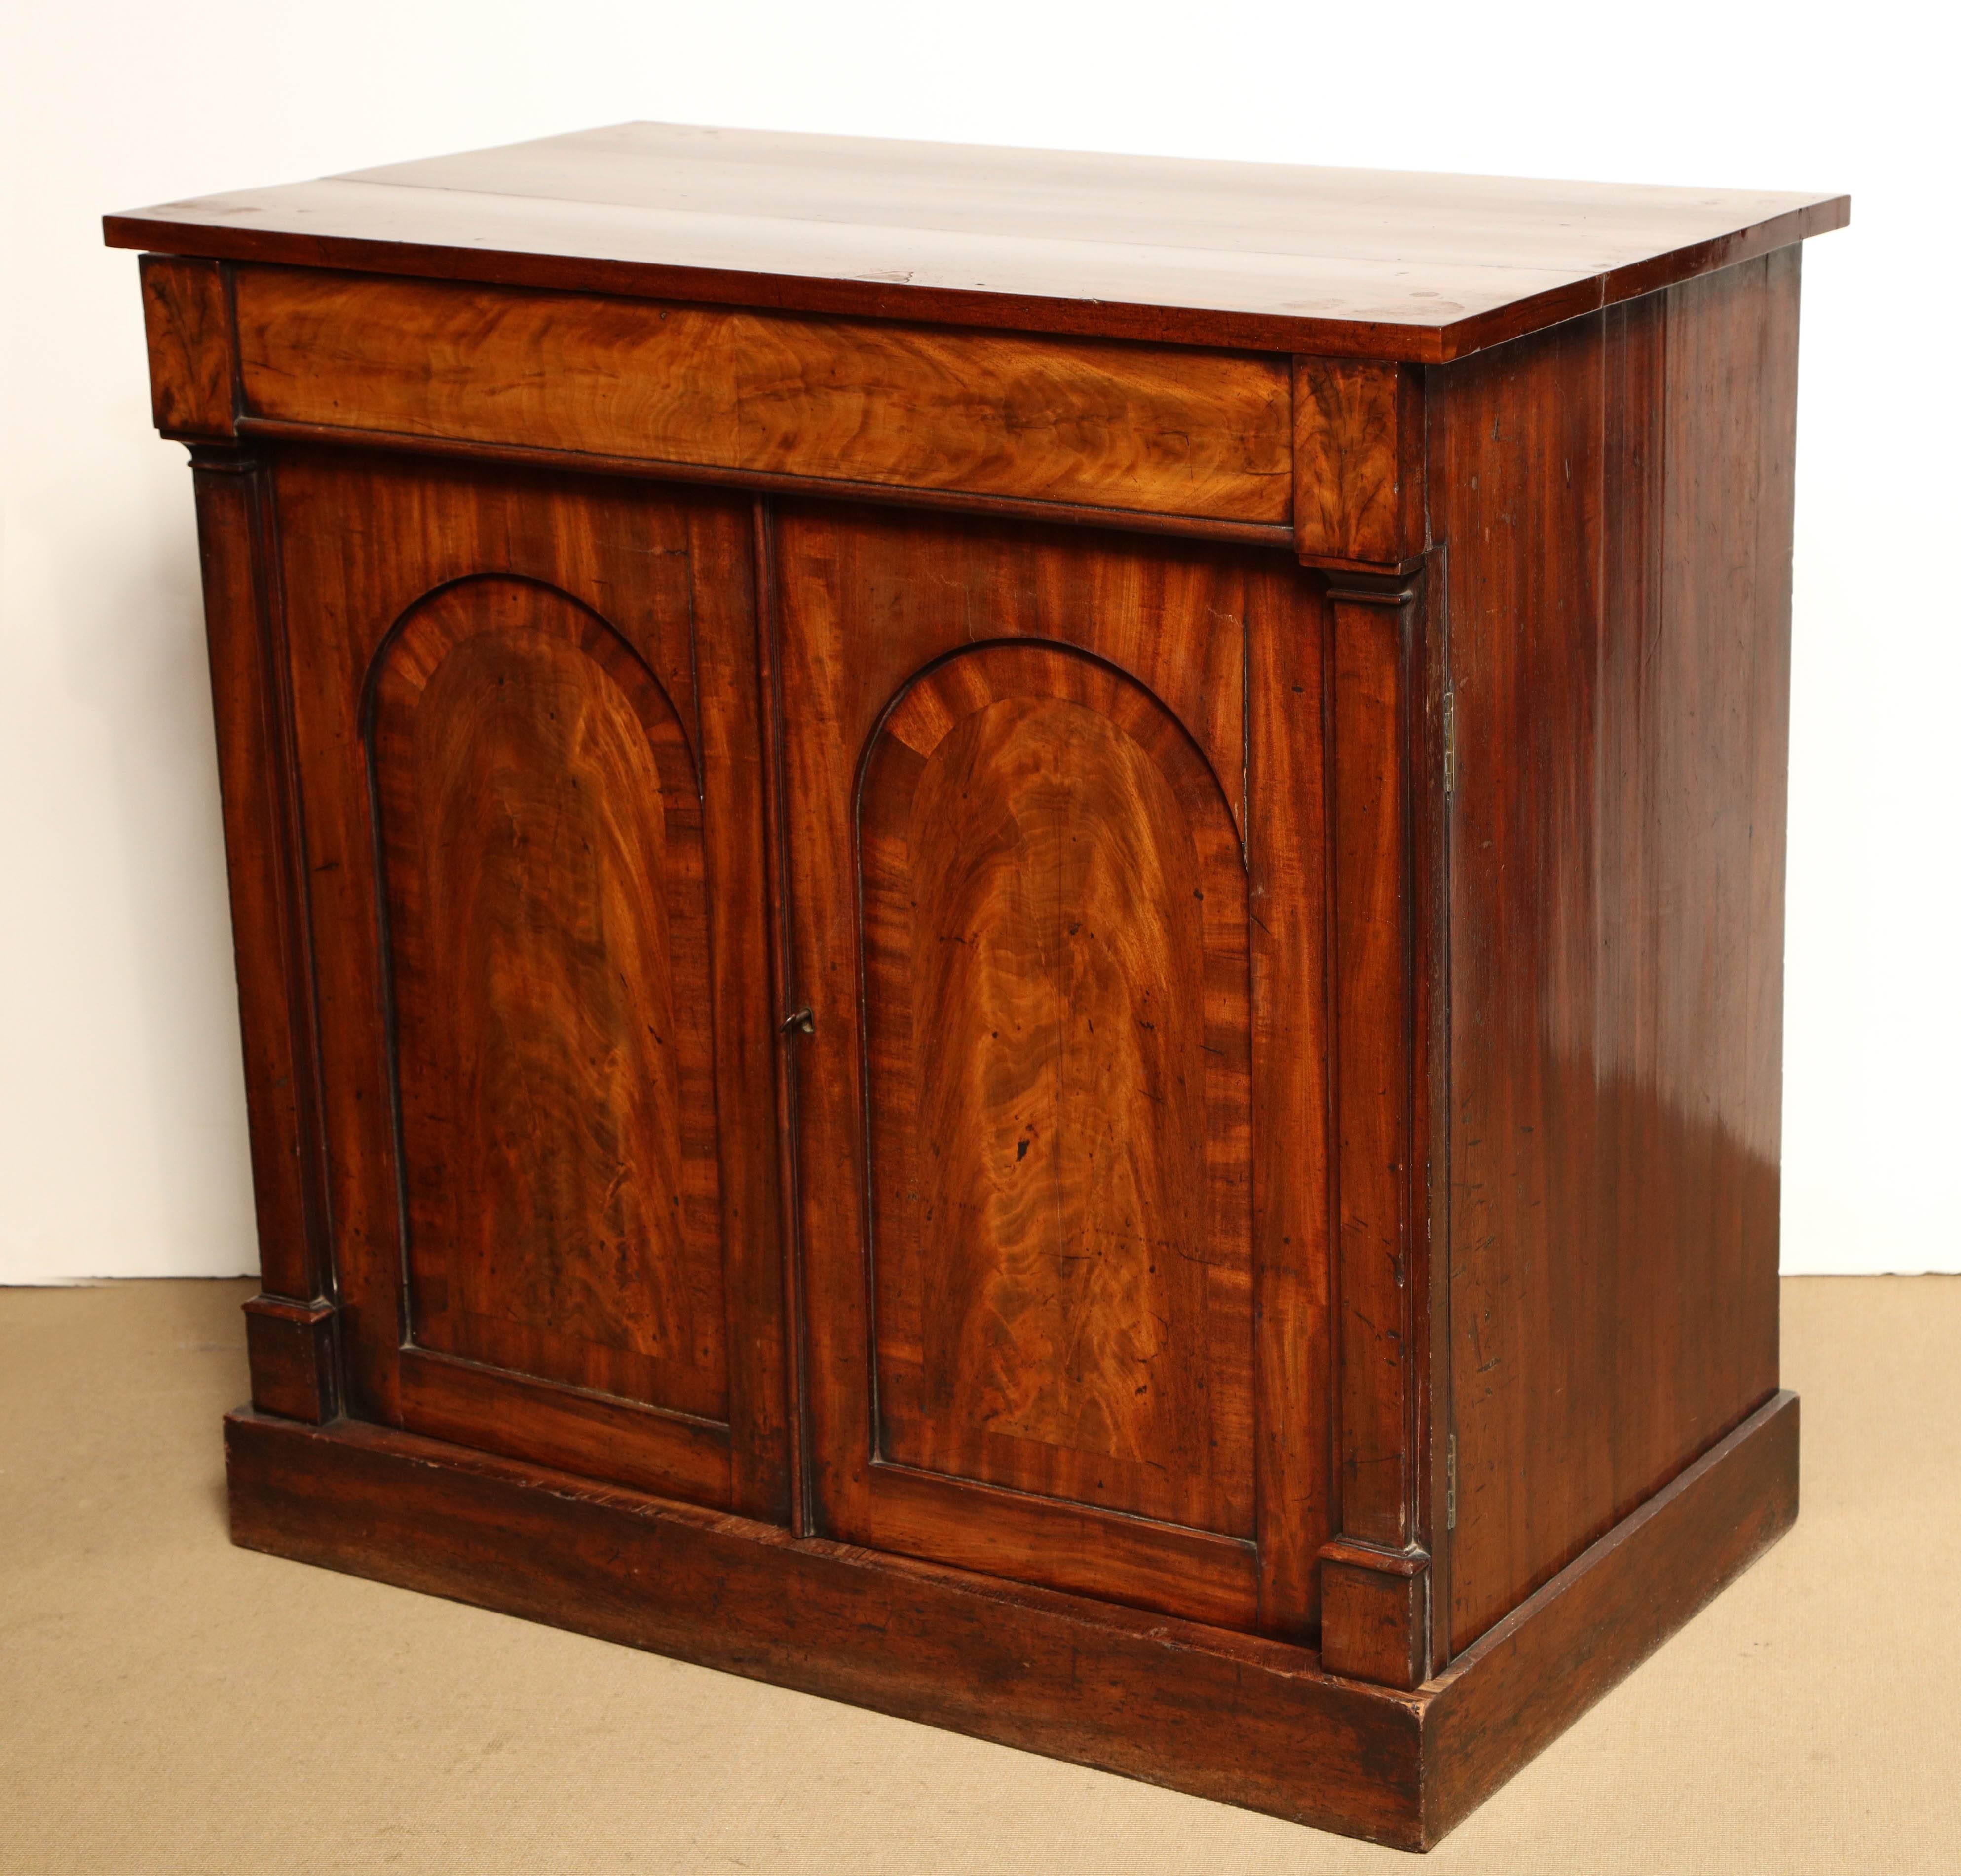 Mid-19th century English, mahogany two-door cupboard by Gillows with one drawer on top and one drawer for bottles behind the right door.